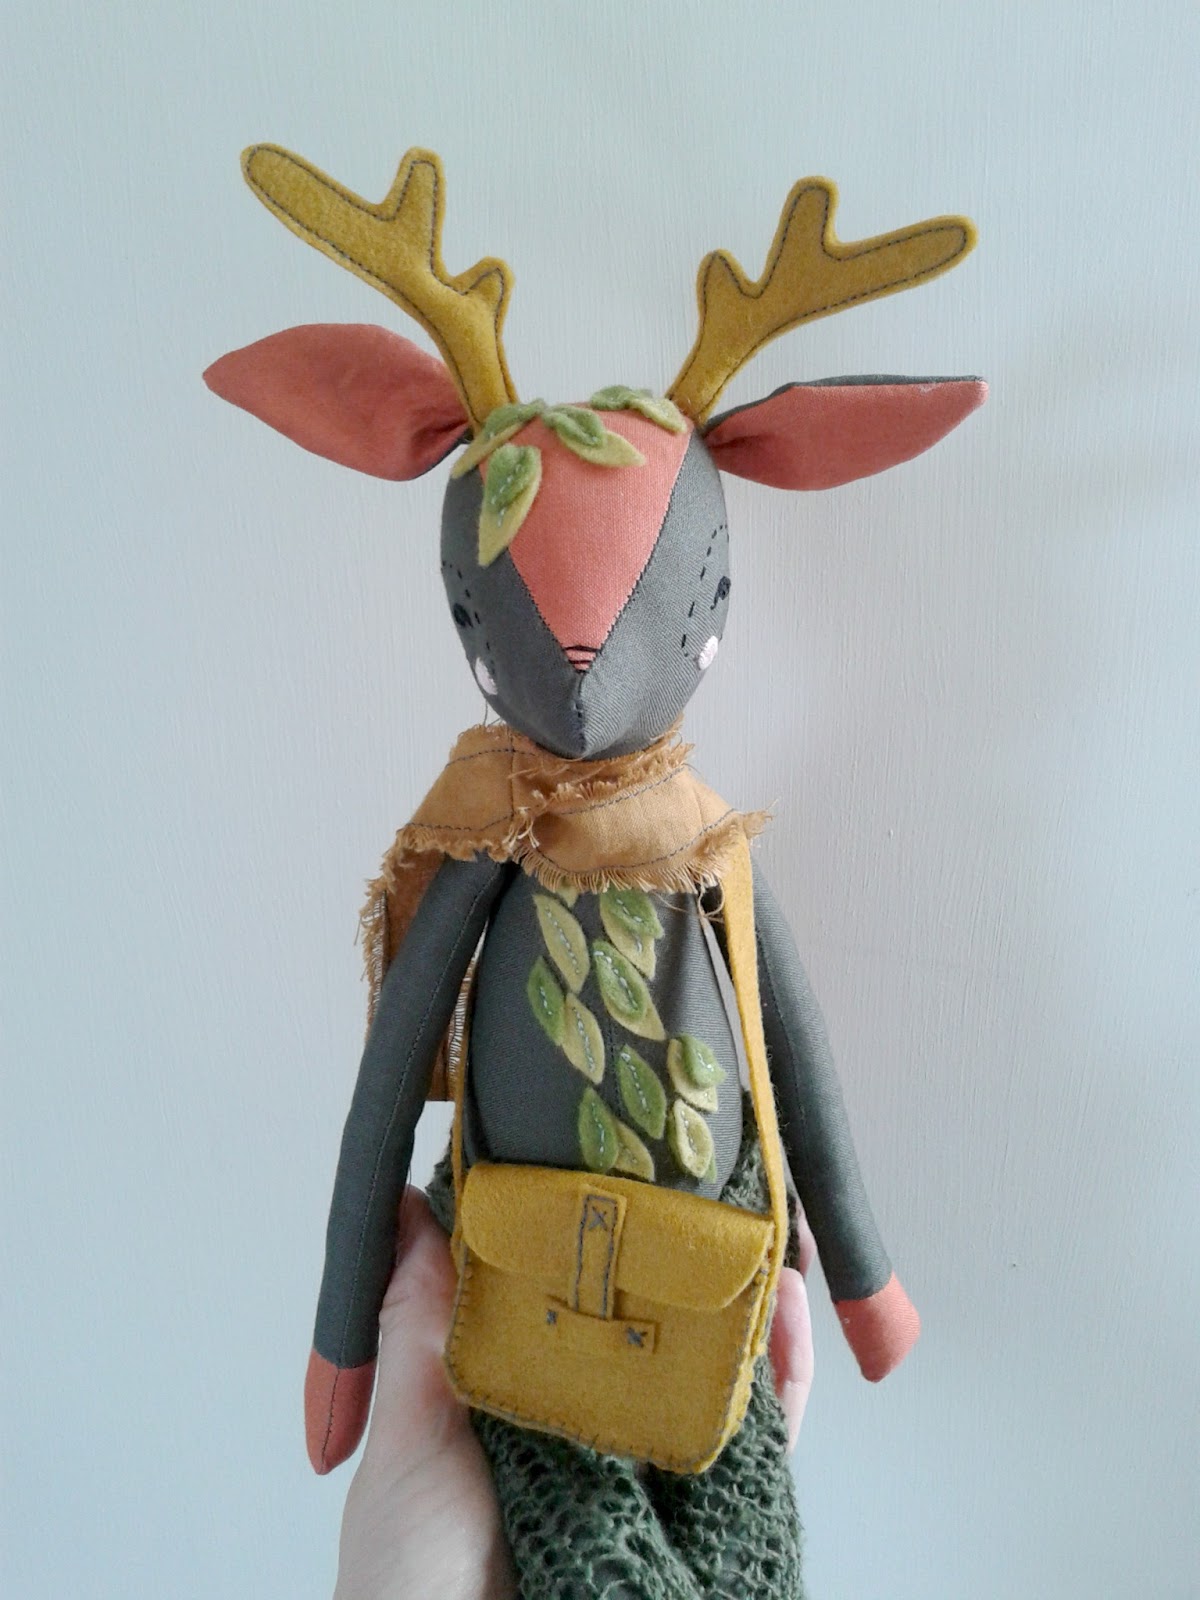 bloom and sew: Where handmade toys meet the law. is common